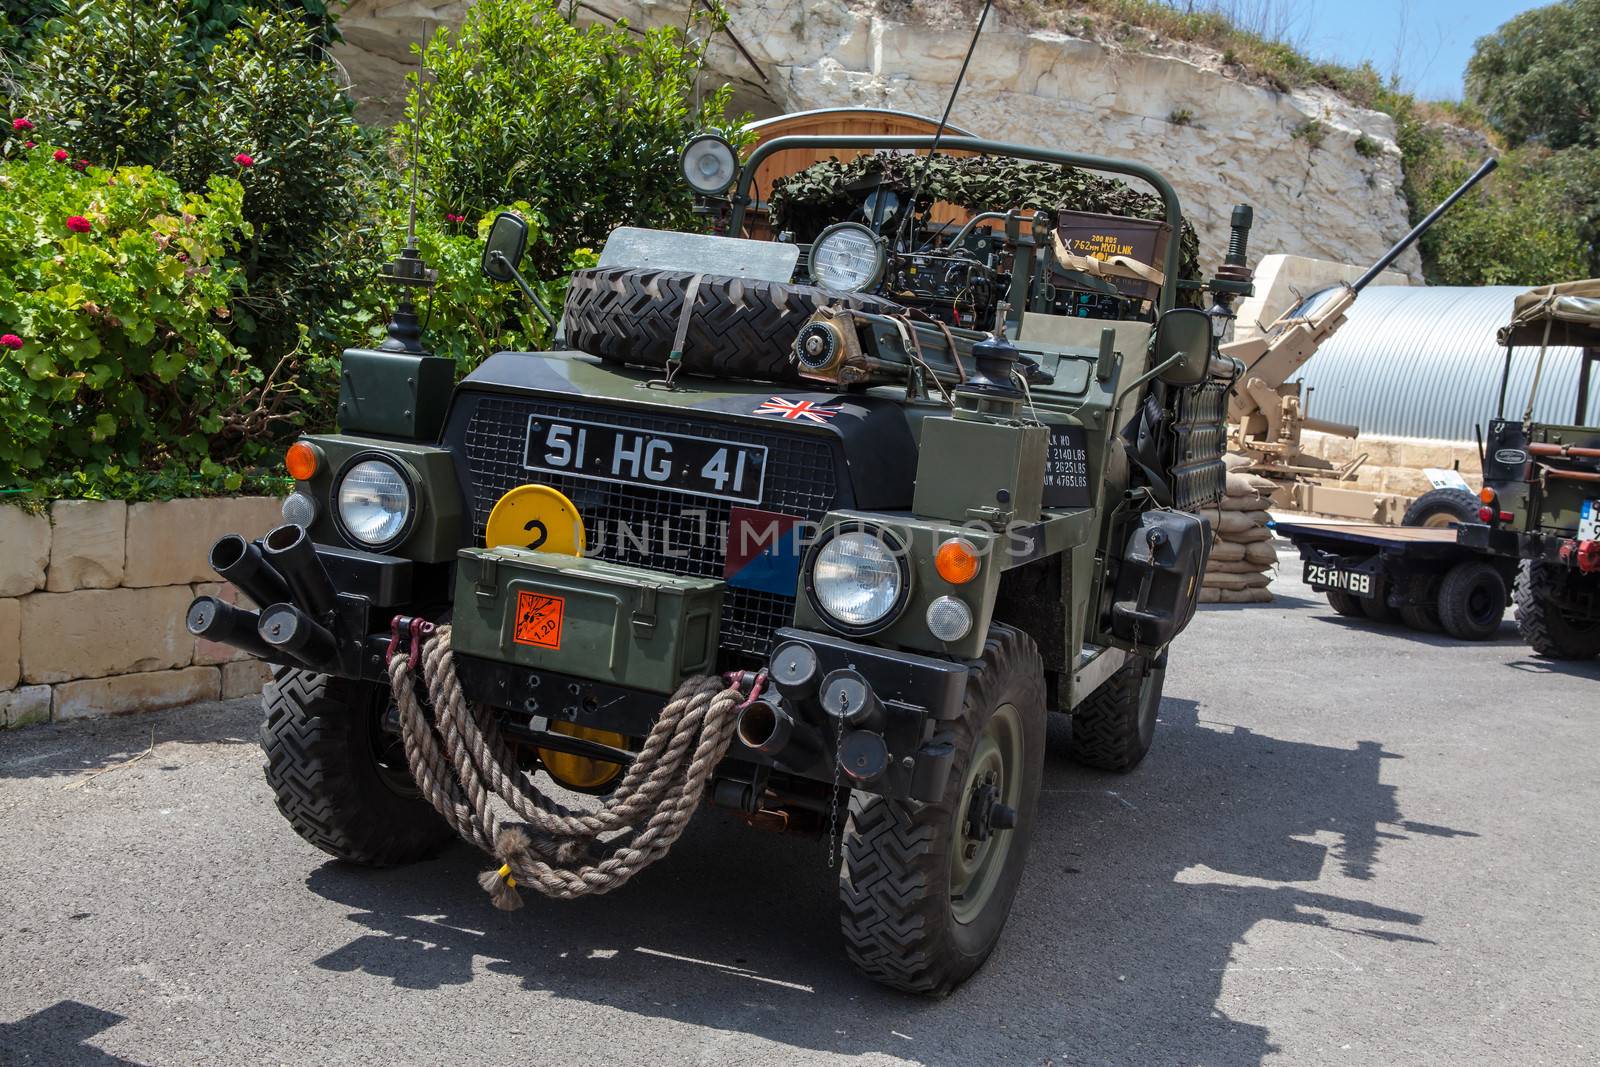 TA' QALI, MALTA - APR 20 - An old military Land Rover on display at The Malta Aviation Museum on 20 April 2013